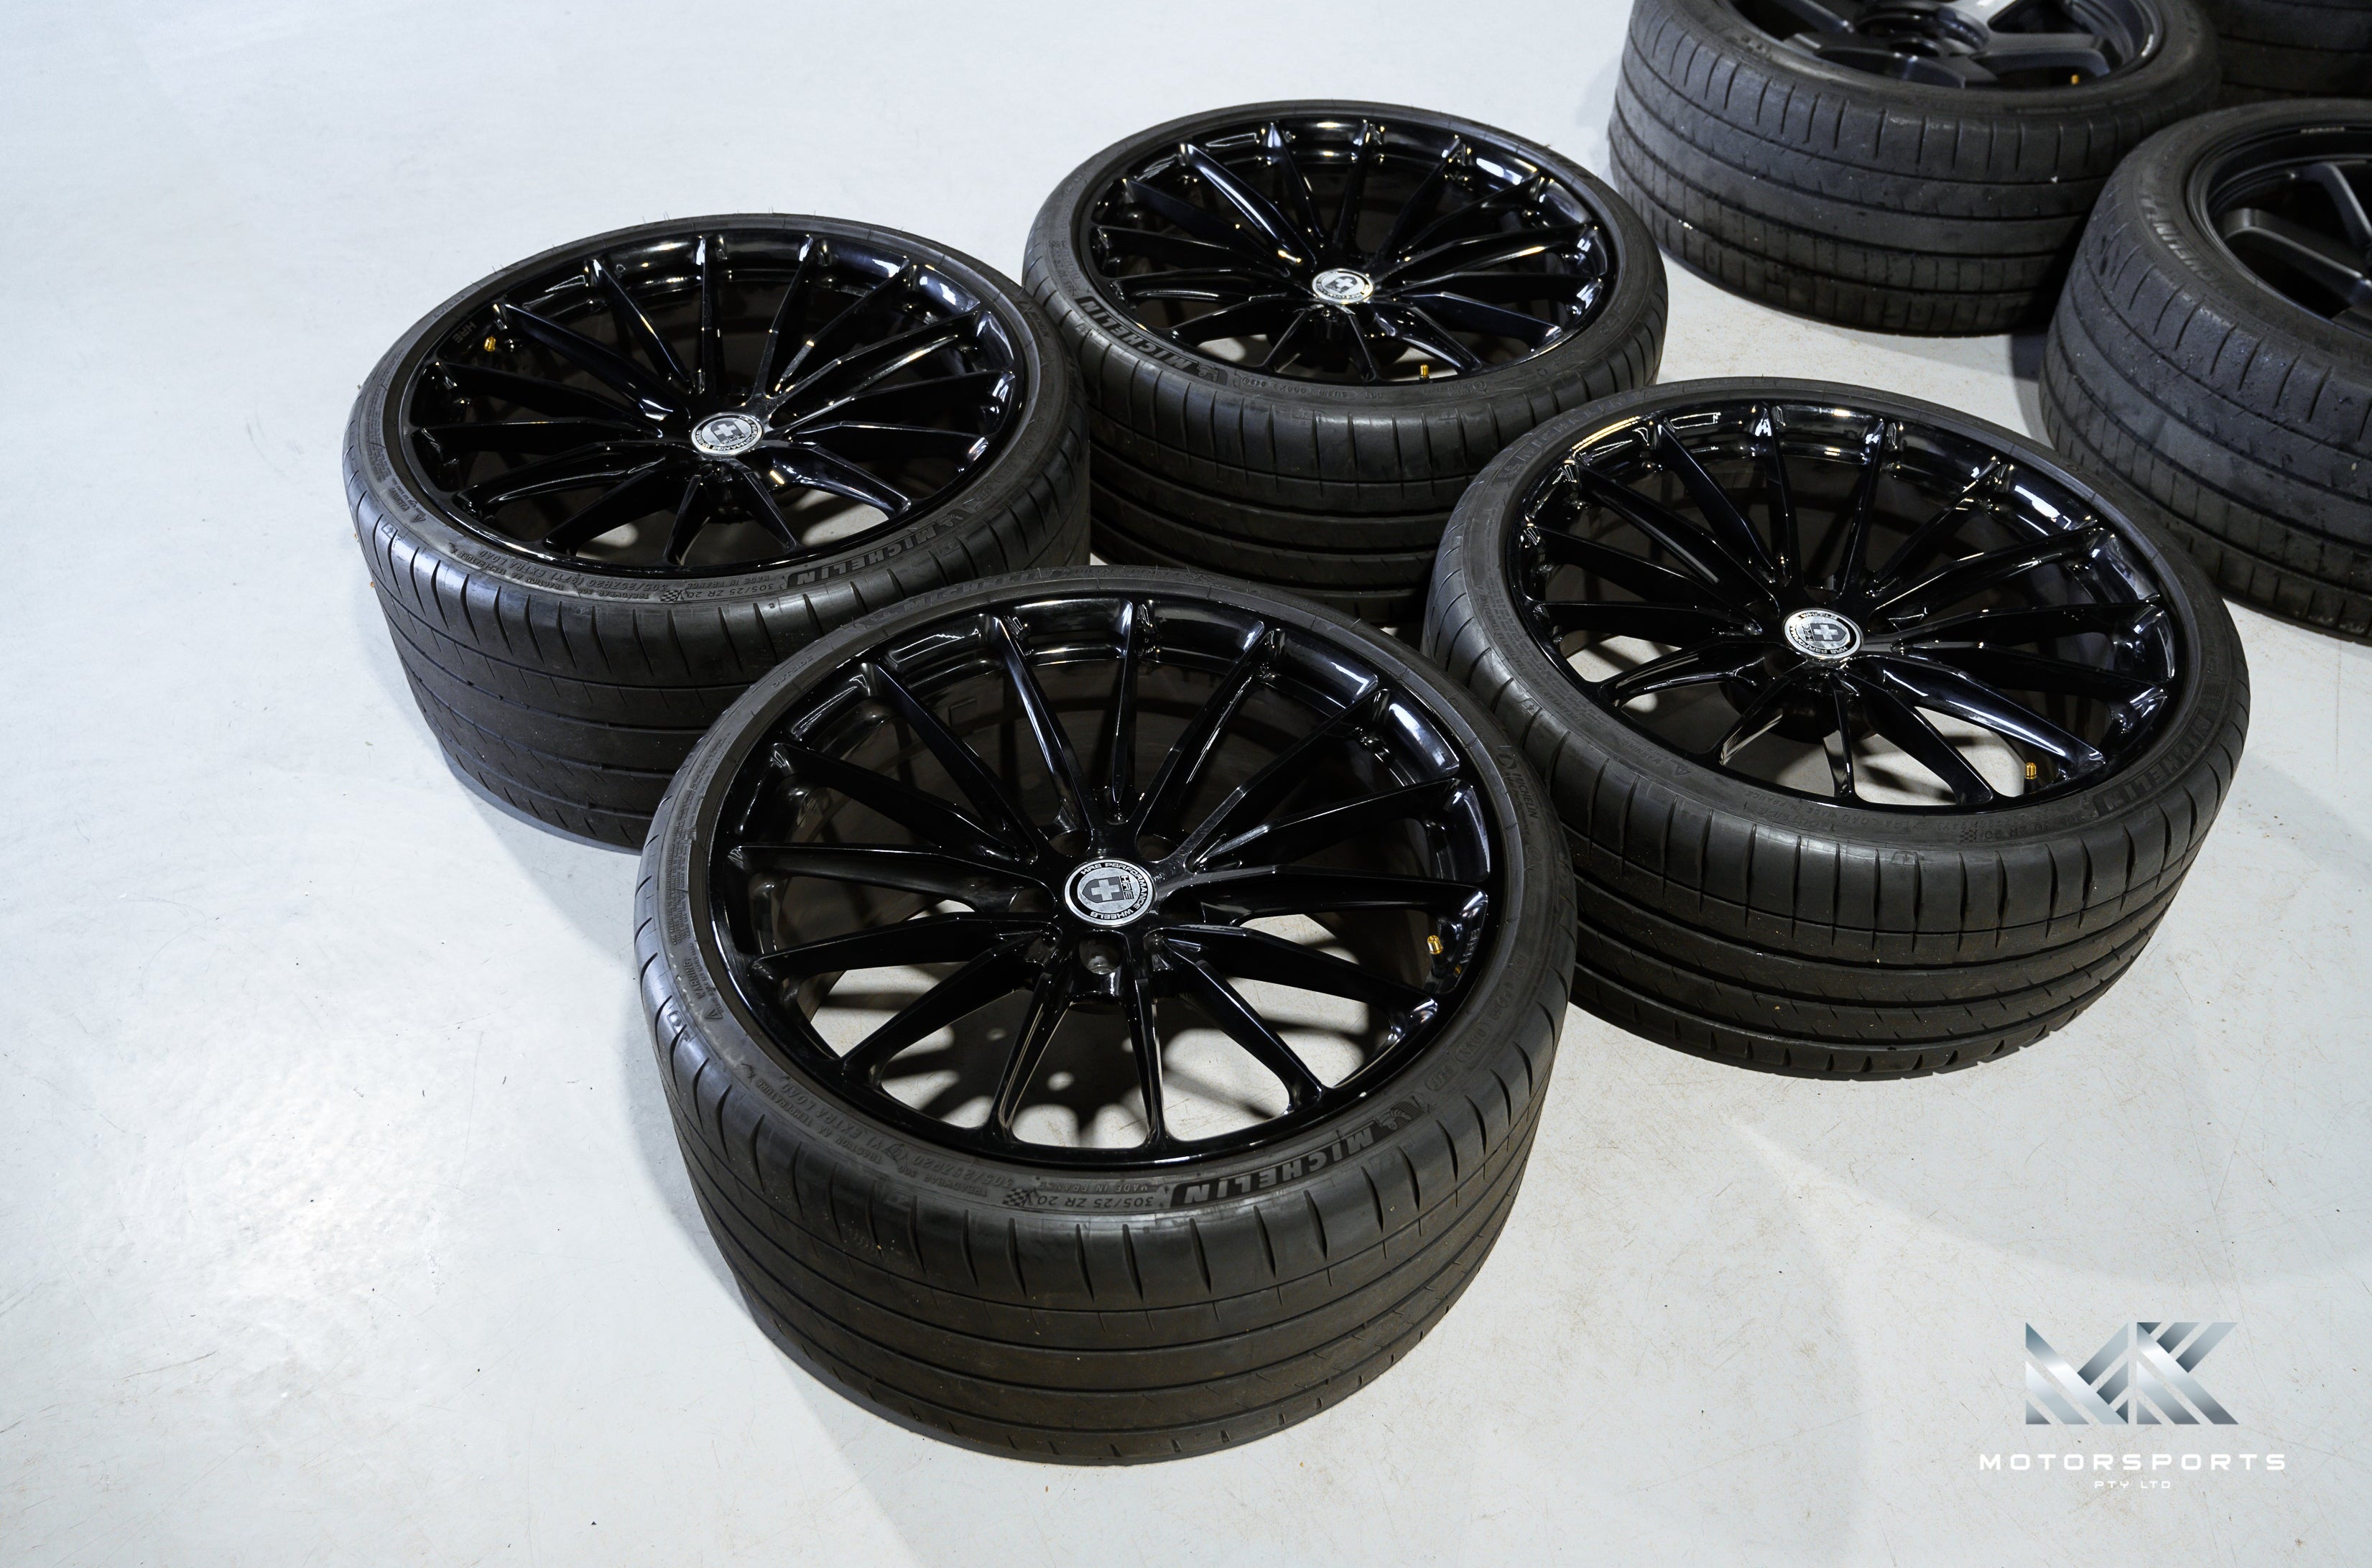 HRE-P103 20" (5x112) - Premium Wheels from Used Wheels - From just $7799.00! Shop now at MK MOTORSPORTS